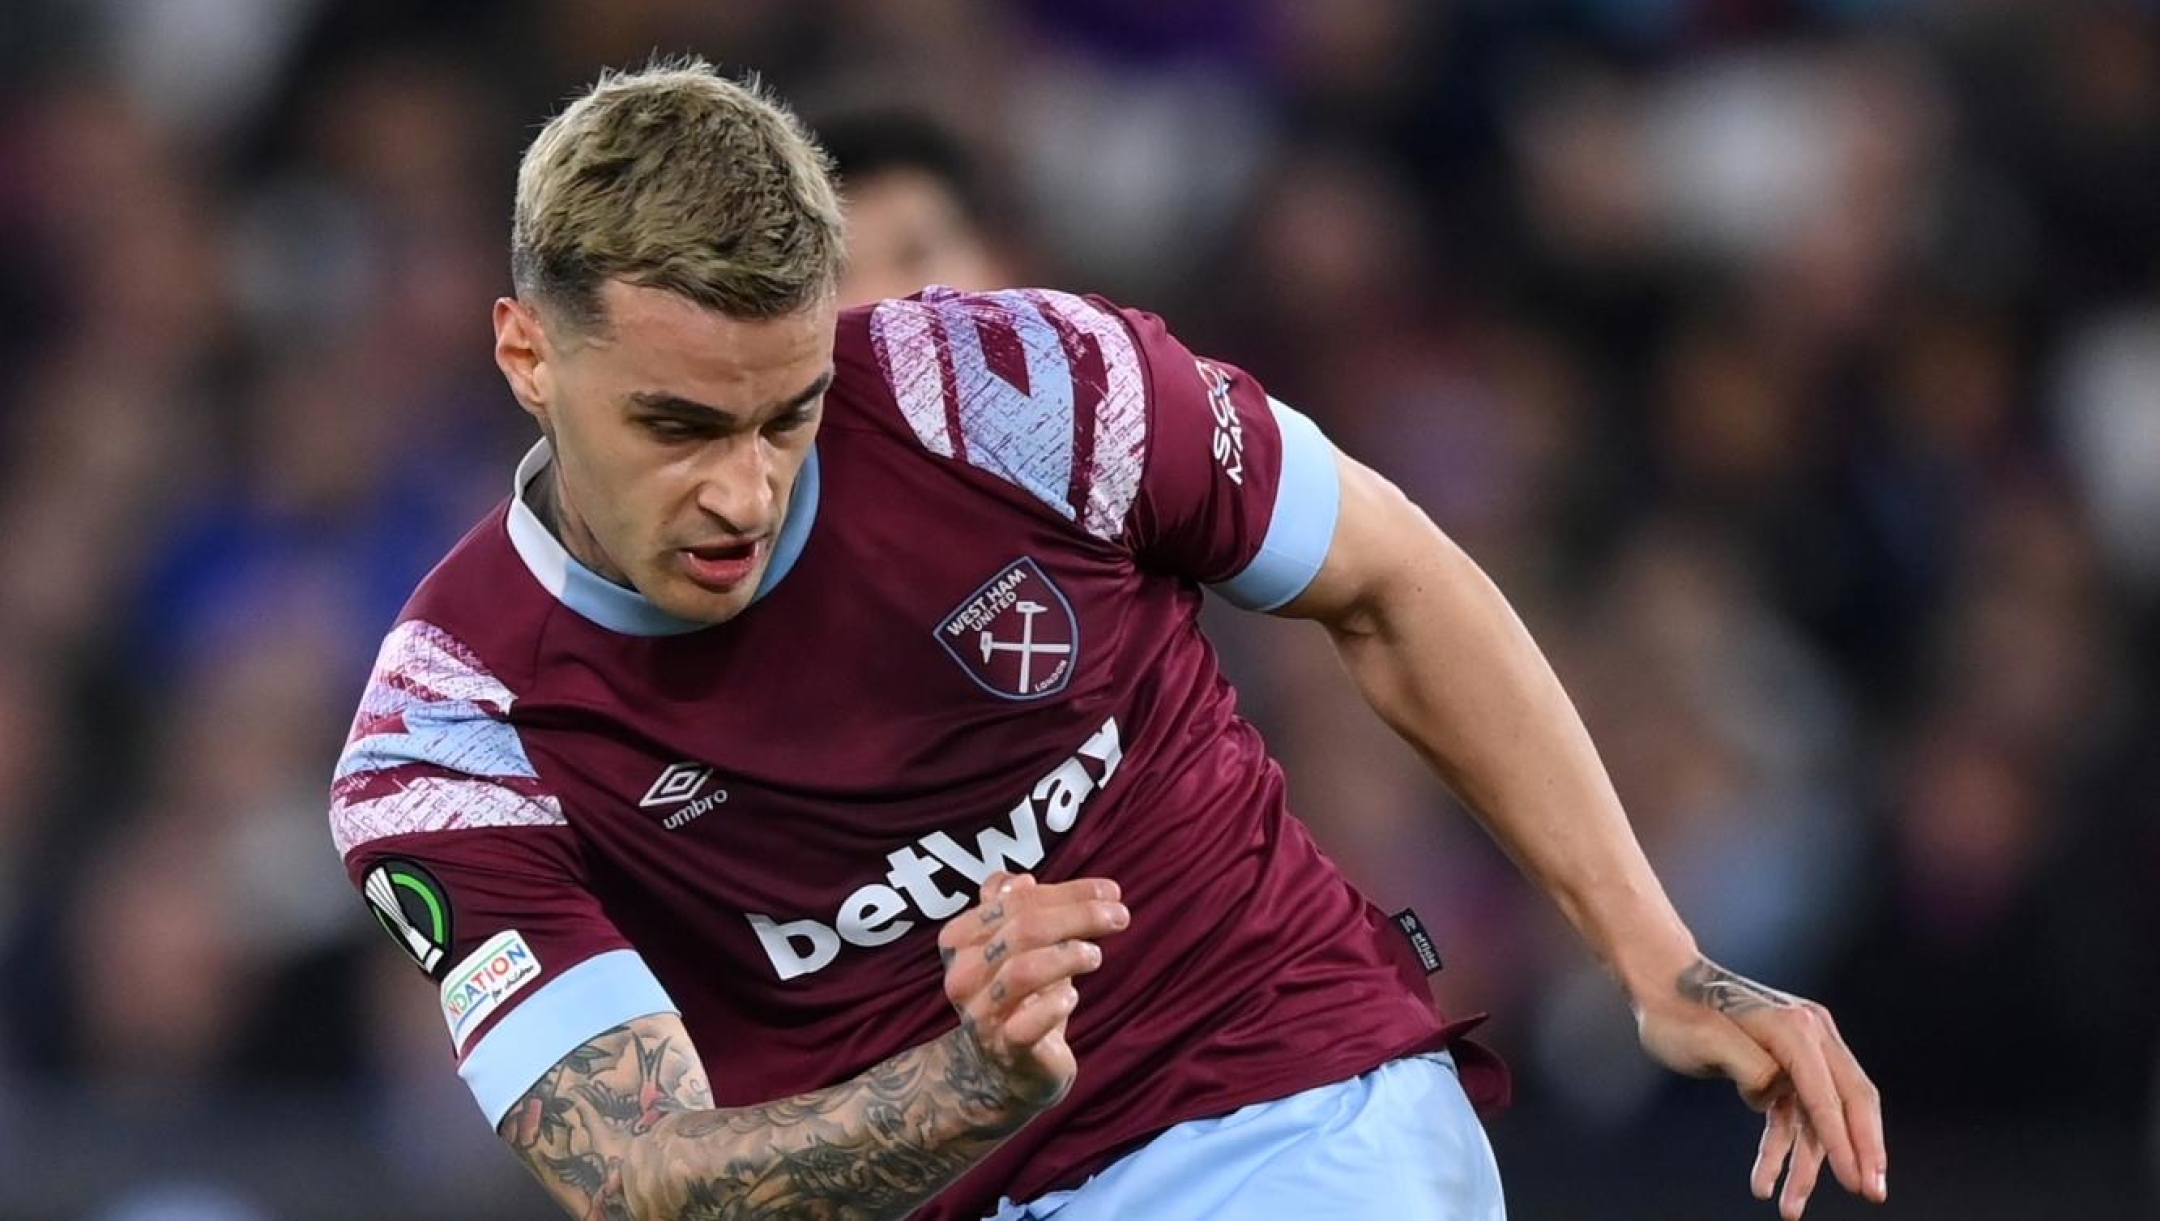 LONDON, ENGLAND - MARCH 16: Gianluca Scamacca of West Ham United shoots during the UEFA Europa Conference League round of 16 leg two match between West Ham United and AEK Larnaca at London Stadium on March 16, 2023 in London, England. (Photo by Justin Setterfield/Getty Images)